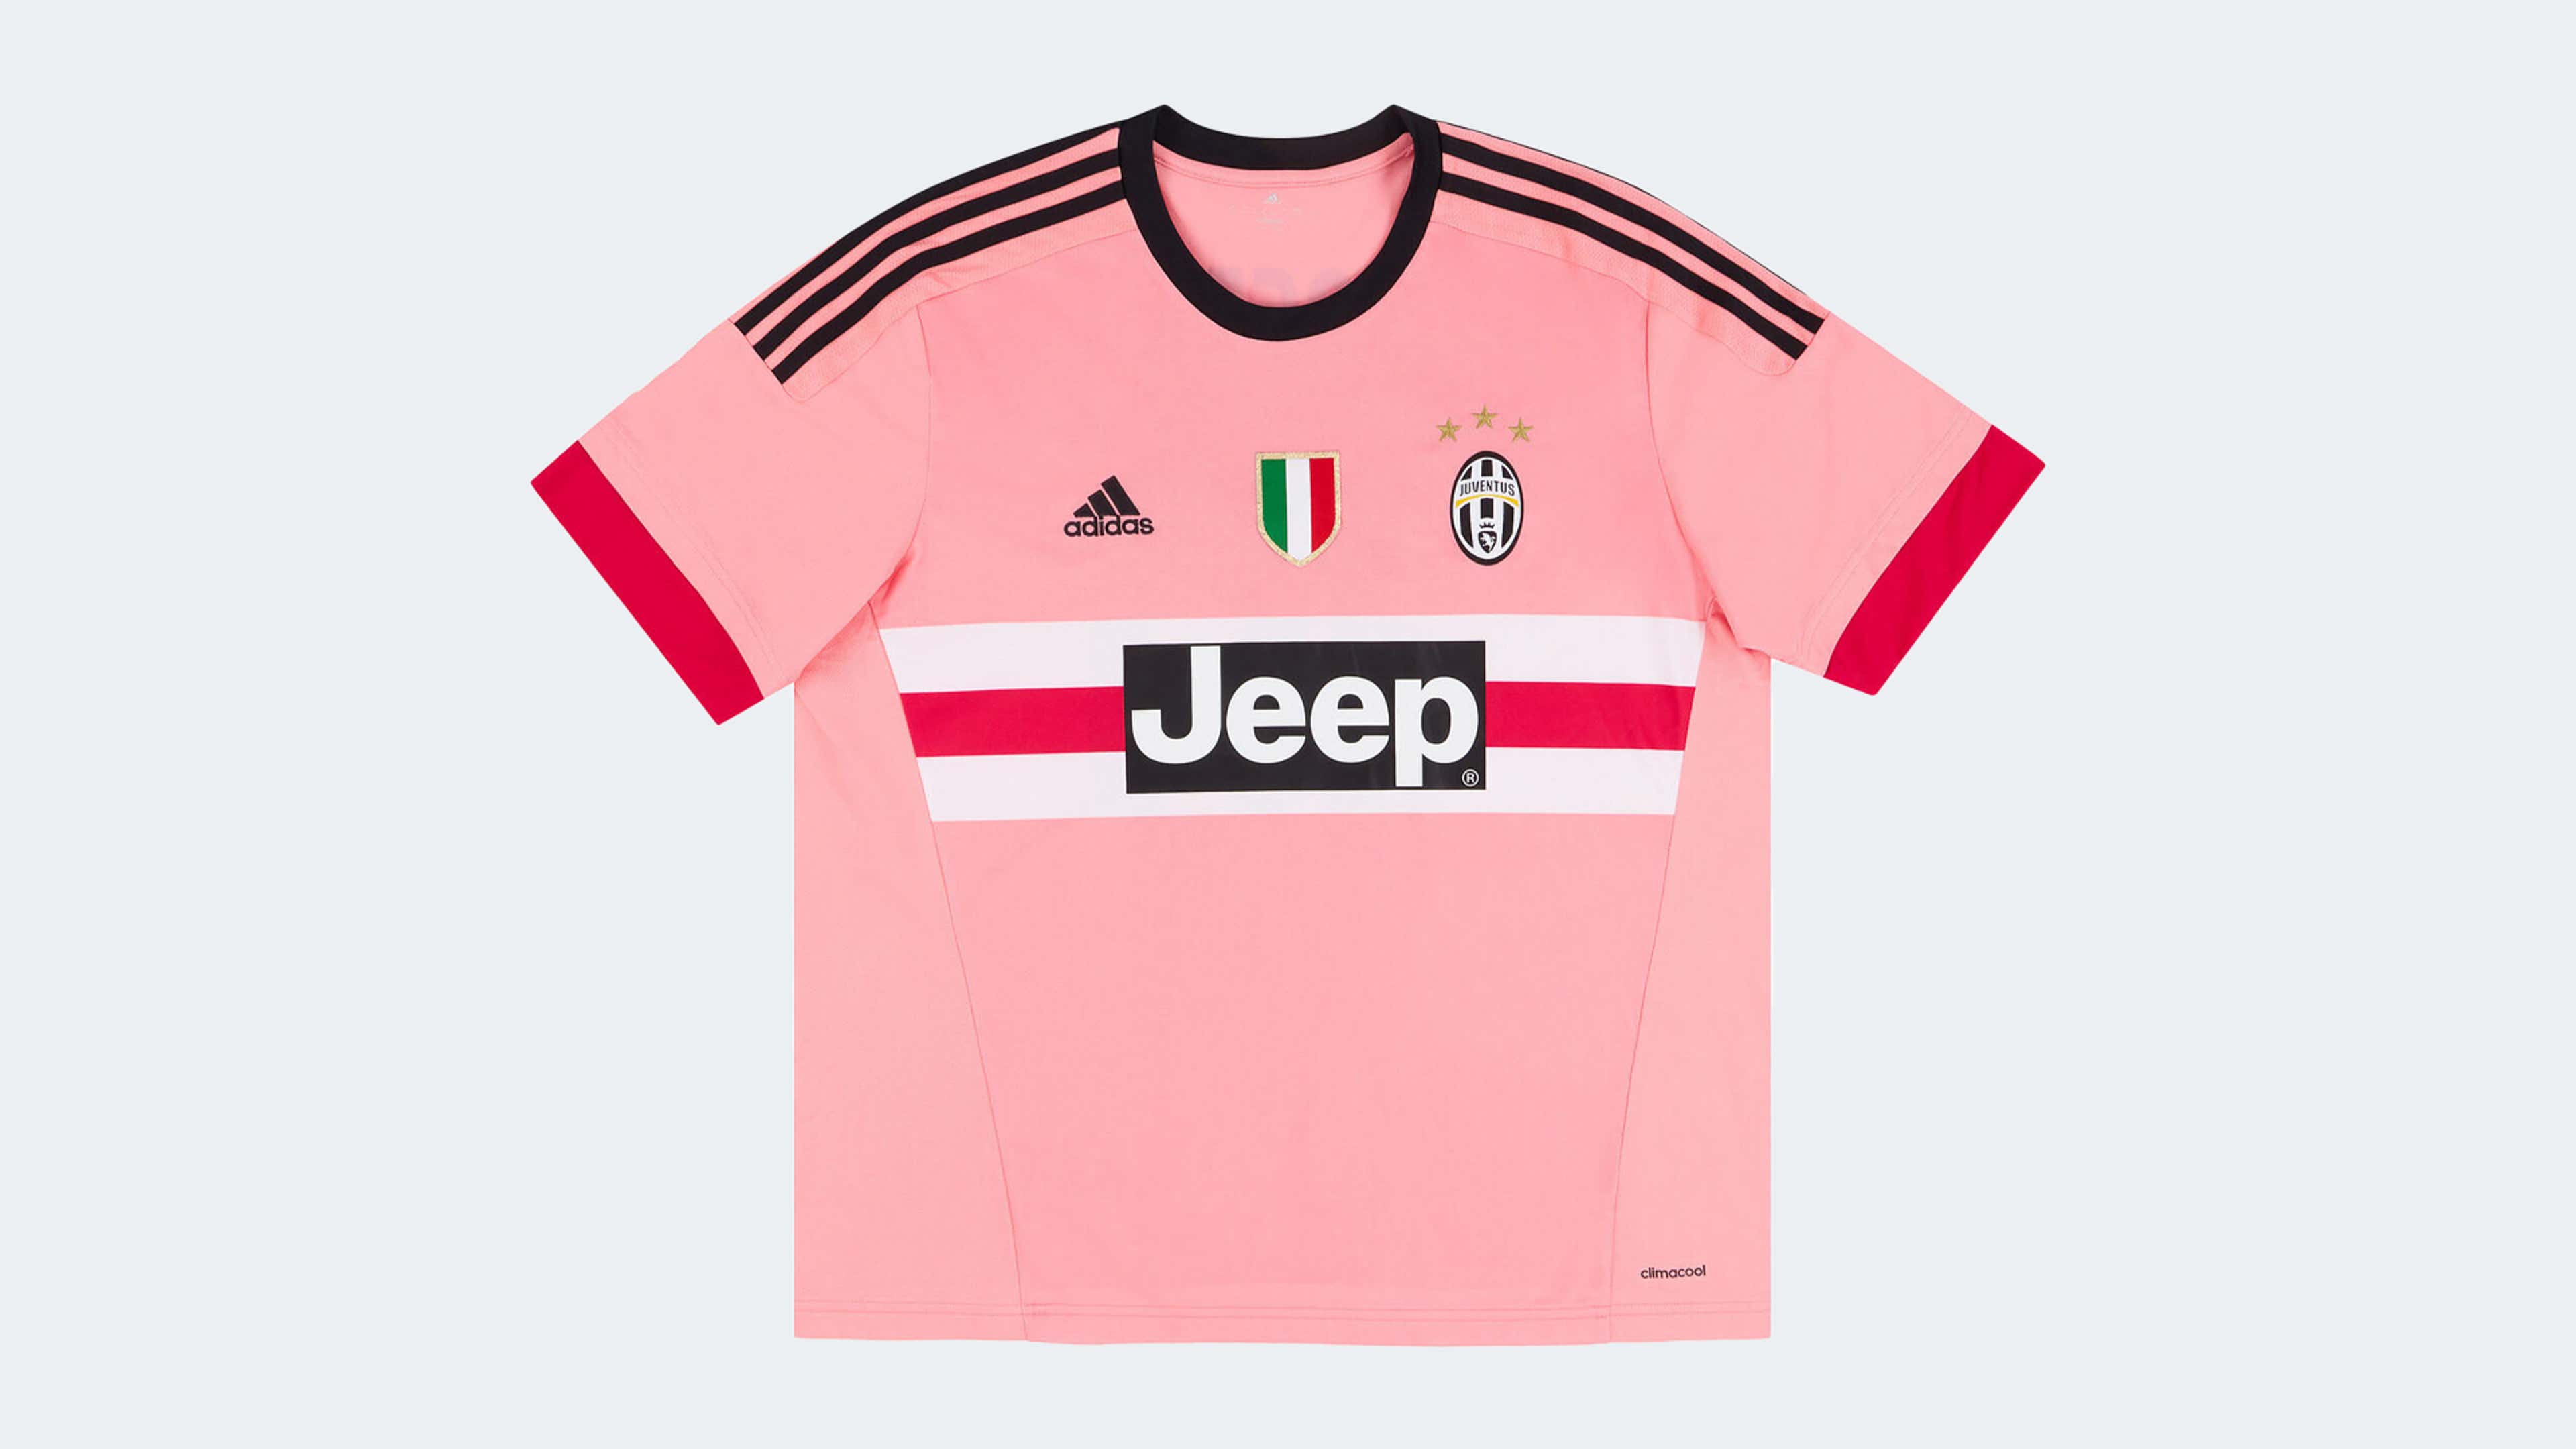 SPORF on X: The best retro kit in football? 👀🔥 We'll go first